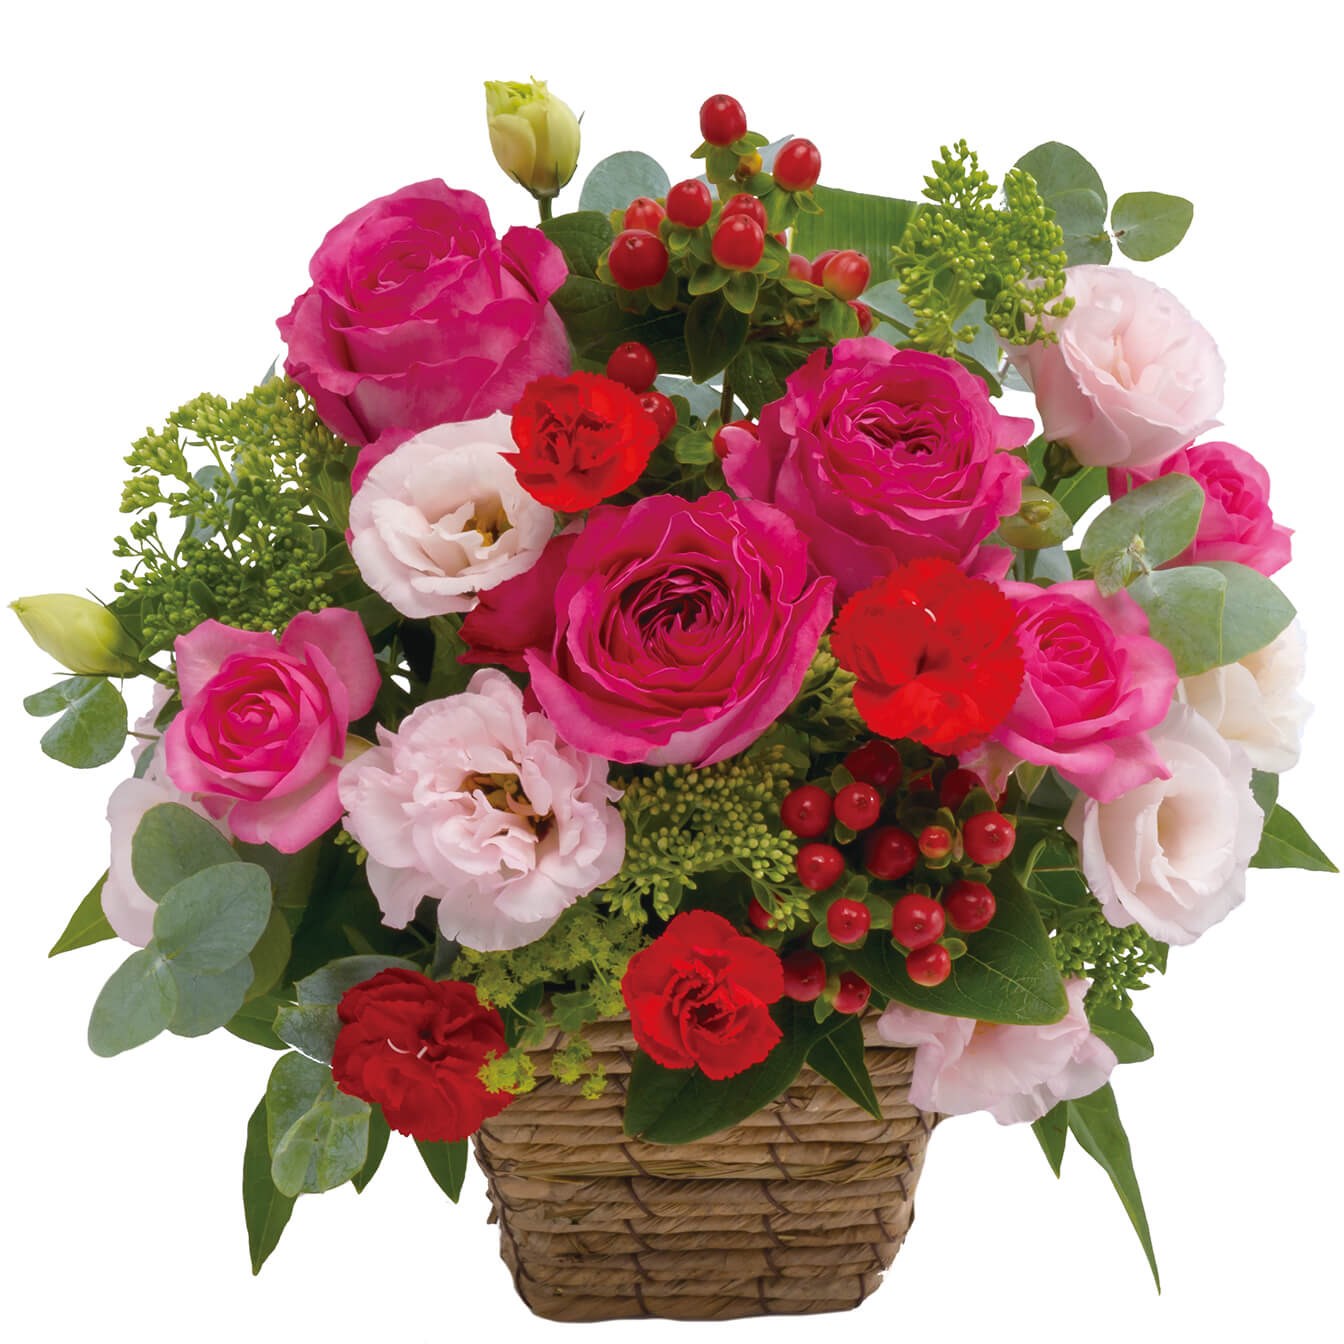 Arrangement in pink and red